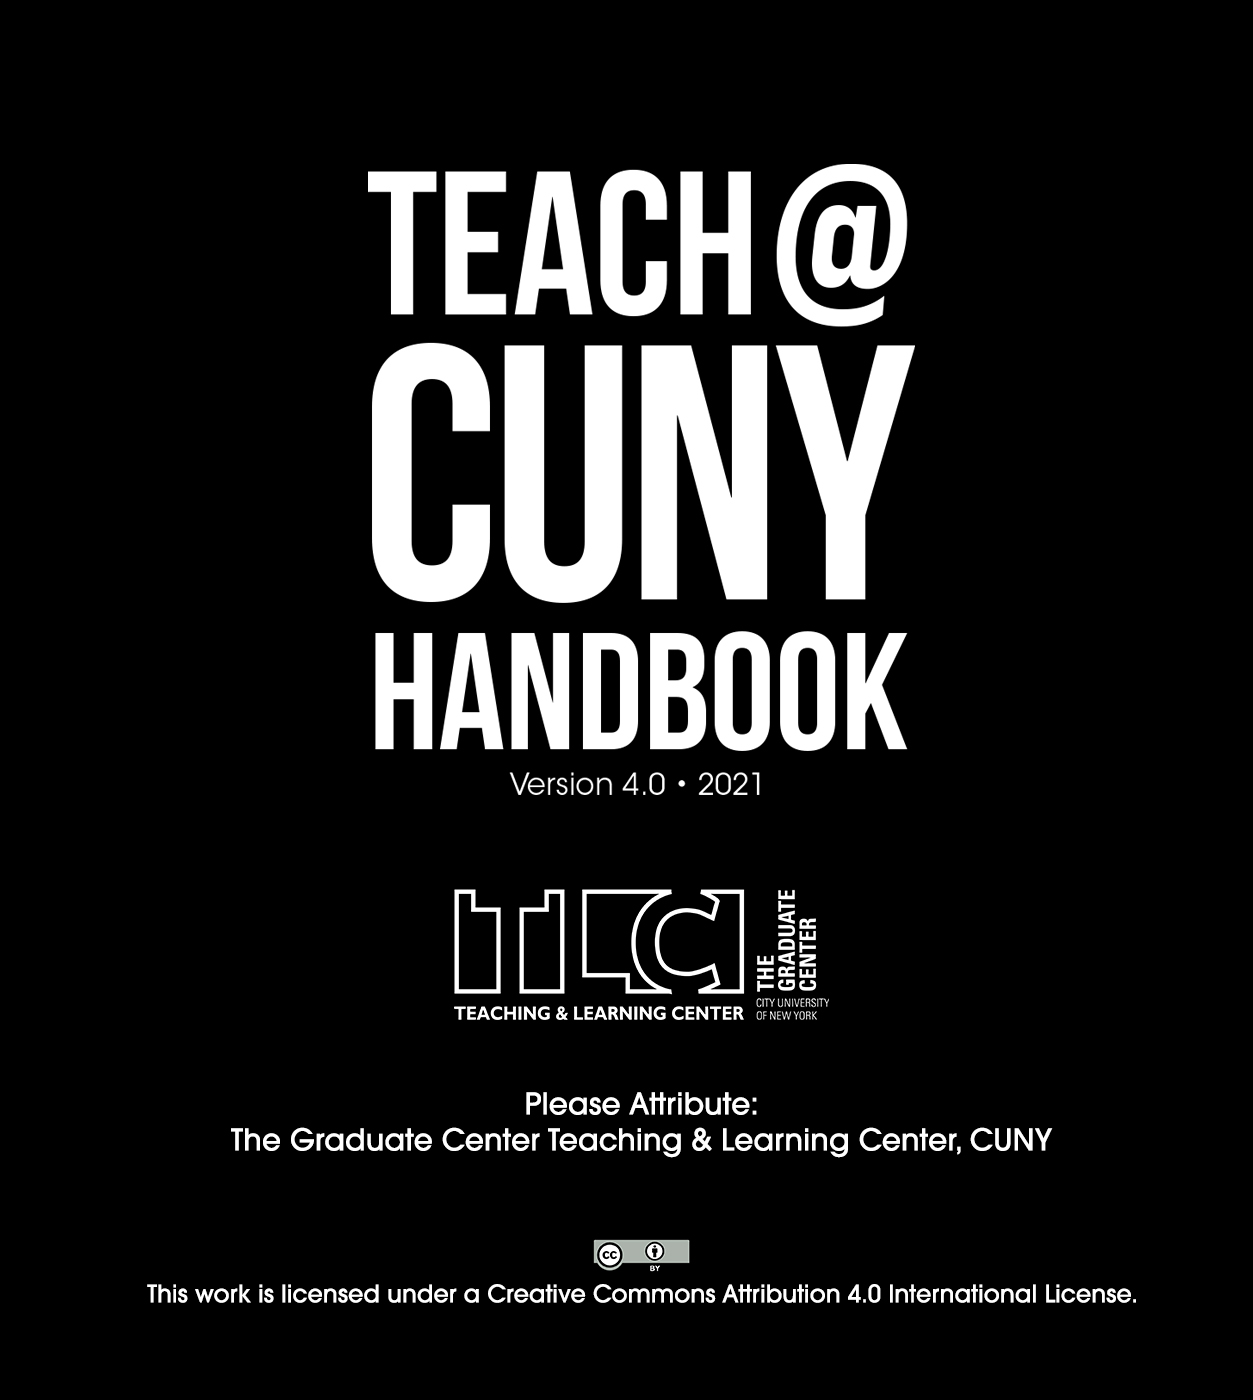 Teach@CUNY Handbook V. 4.0 cover, in large white font reads "Teach@CUNY Handbook"; in smaller white font reads "Version 4.0 2021" below that is the logo for the Teaching and Learning Center at the Graduate Center, CUNY, followed by "Please Attribute: The Graduate Center Teaching & Learning Center, CUNY". The image ends with a "Creative Commons By" license and the text "This work is licensed under a Creative Commons Attribution 4.0 International License."